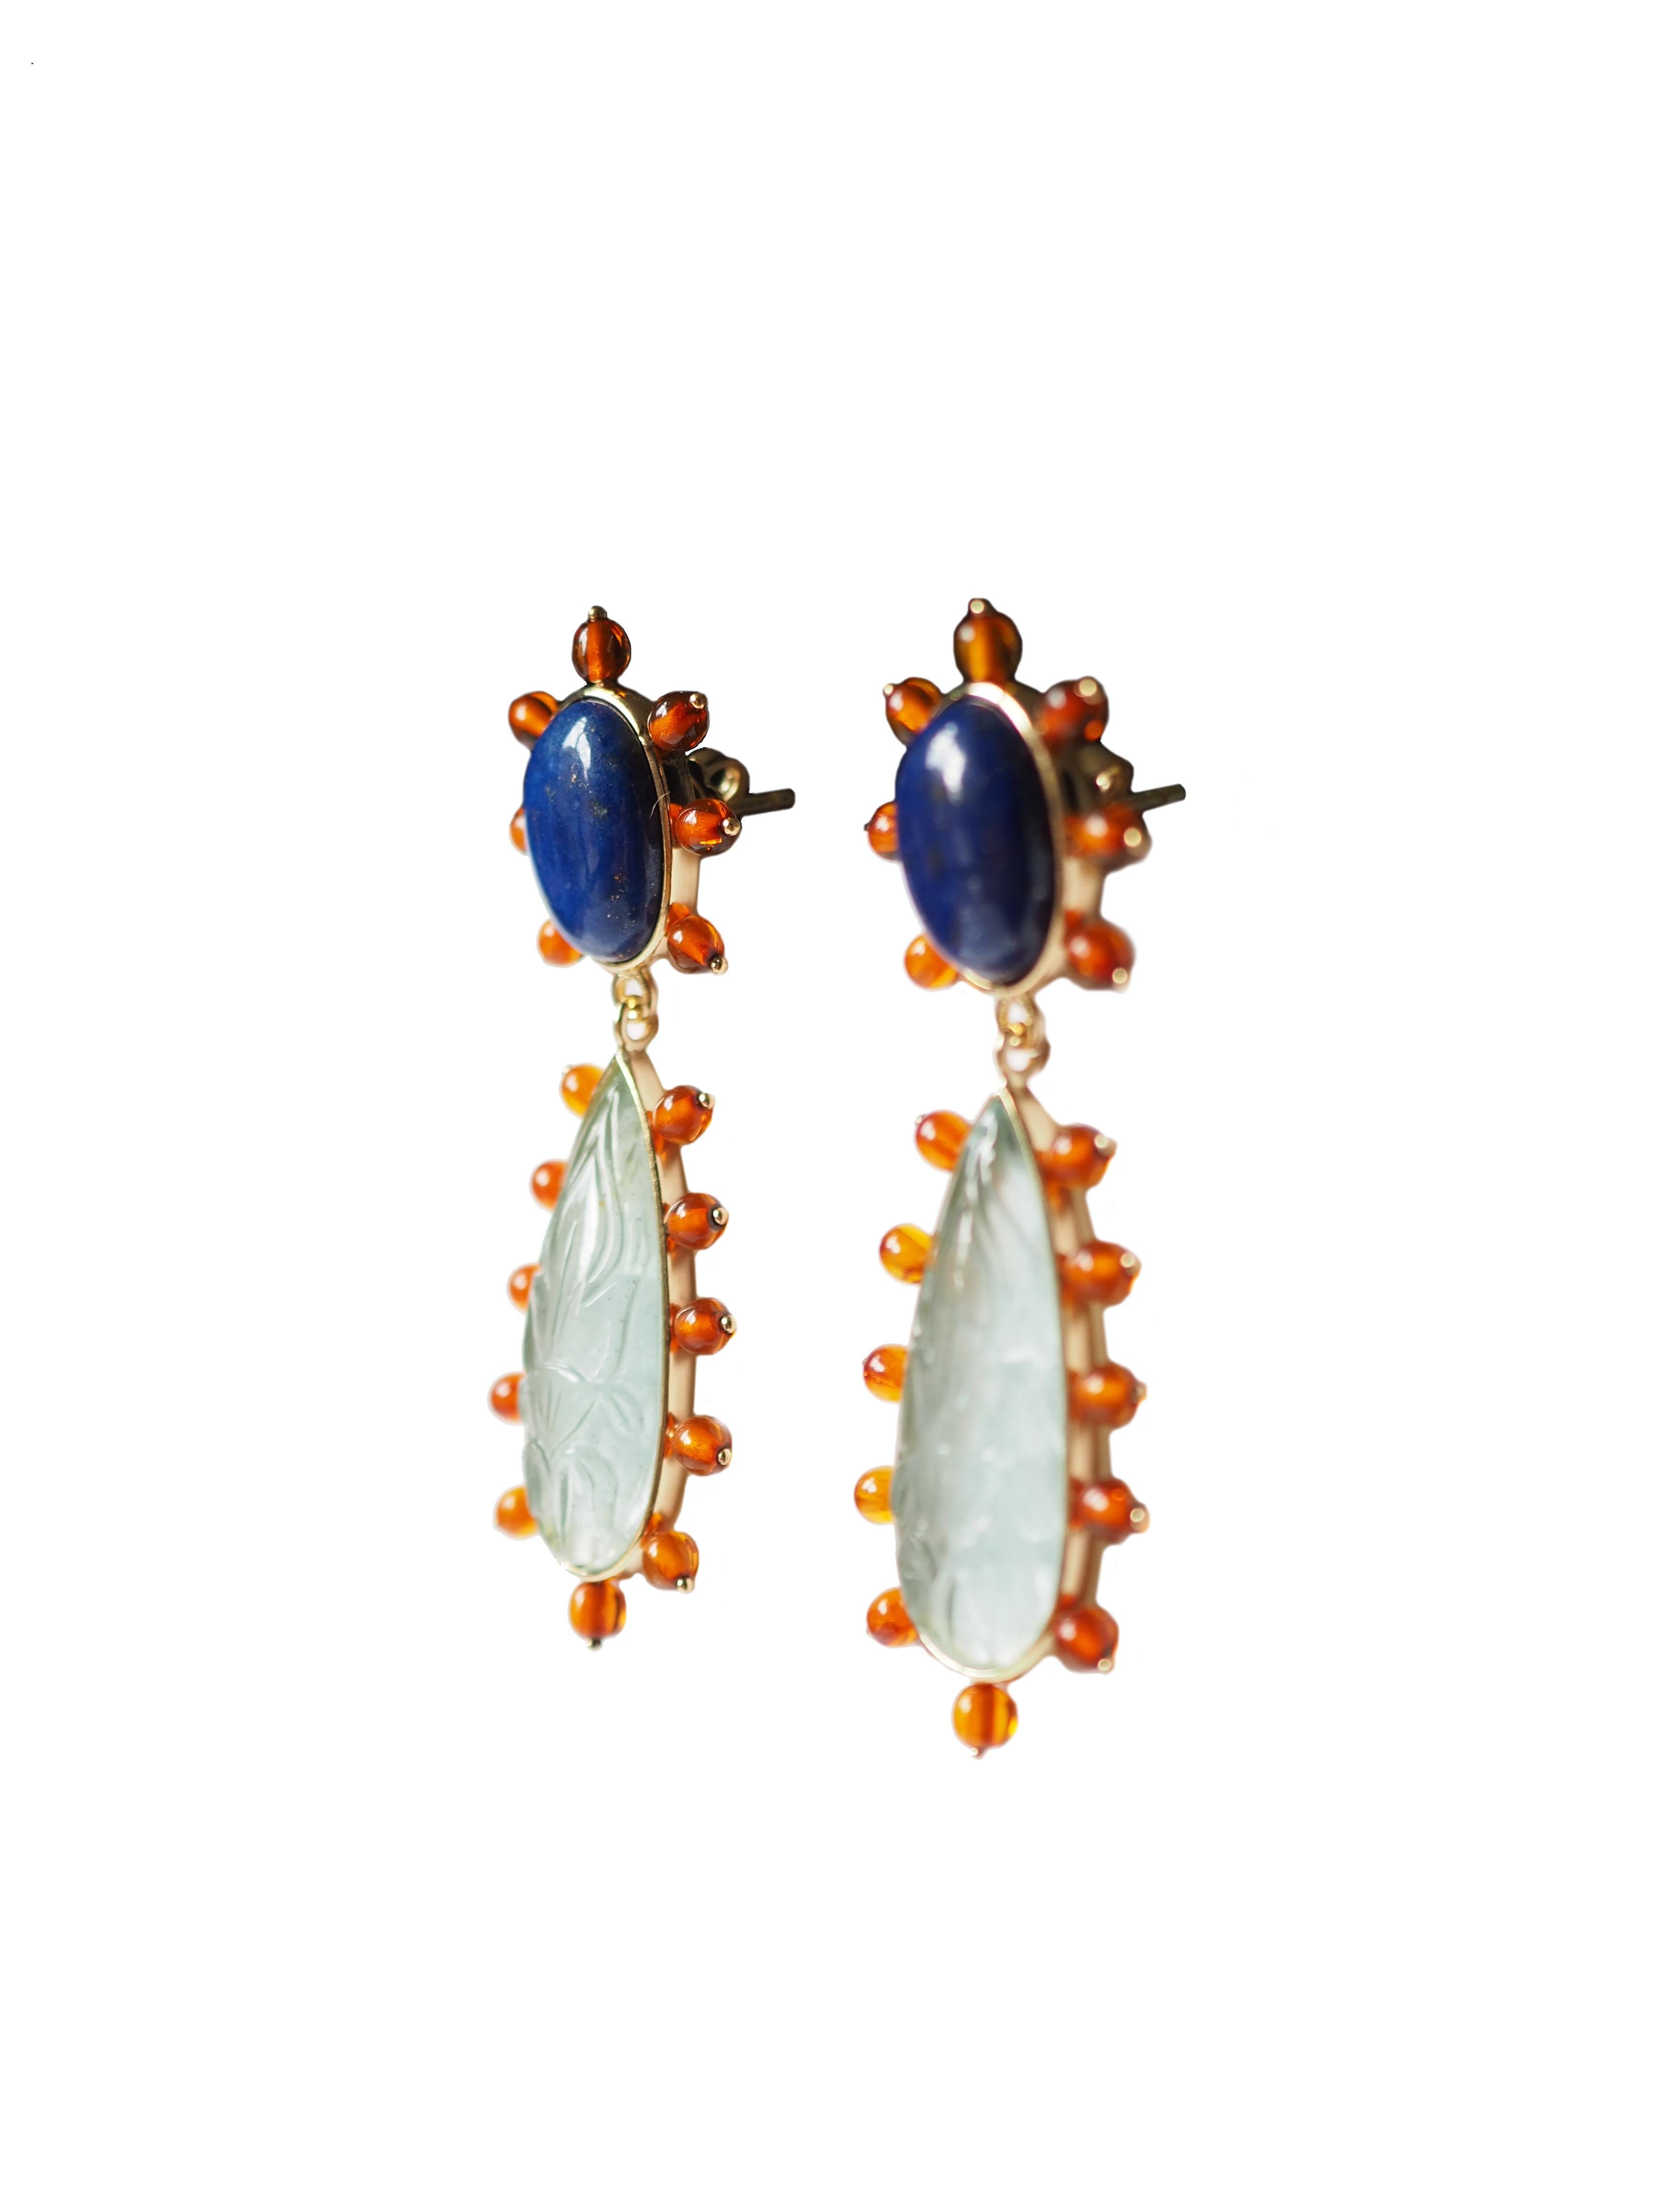 Carved Aquamarine drop 18 kt Gold gr 8,90 amber cabochon Lapis earrings. Total length 4,5cm
All Giulia Colussi jewelry is new and has never been previously owned or worn. Each item will arrive at your door beautifully gift wrapped in our boxes, put